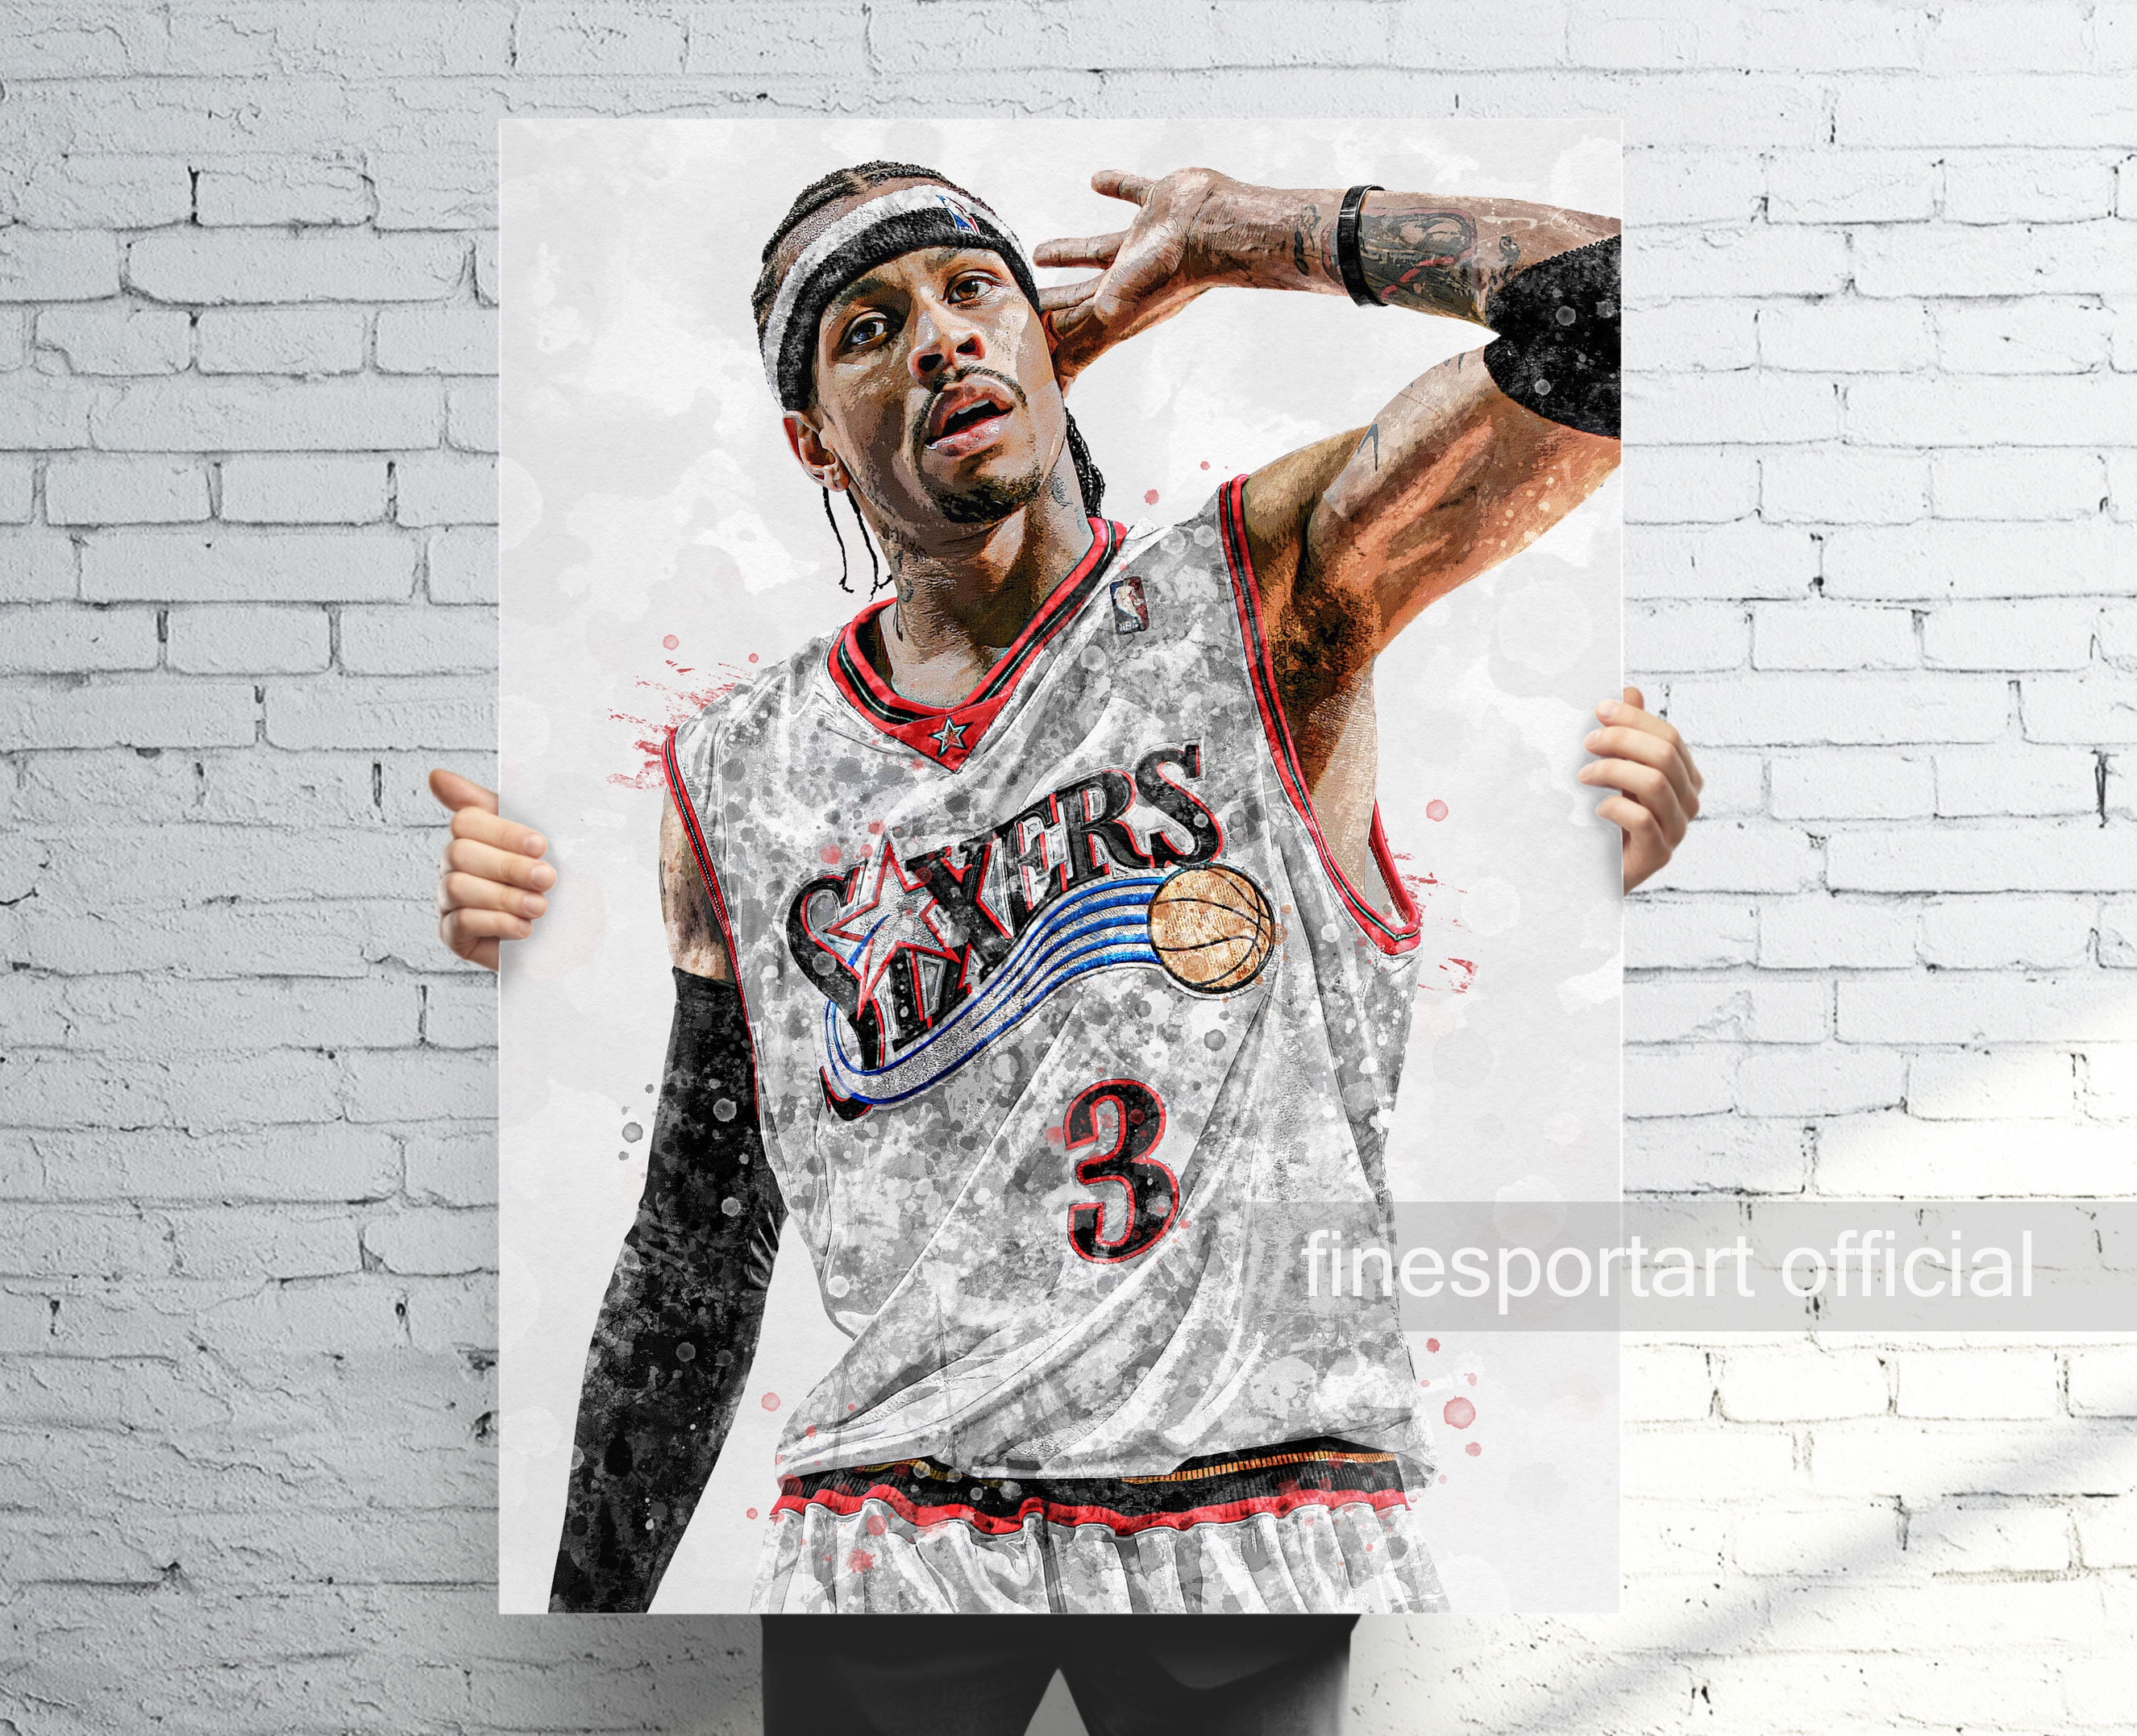 TUITA Allen Iverson USA Basketball Player Poster (2) Canvas Wall Art Prints  Poster Gifts Photo Picture Painting Posters Room Decor Home Decorative